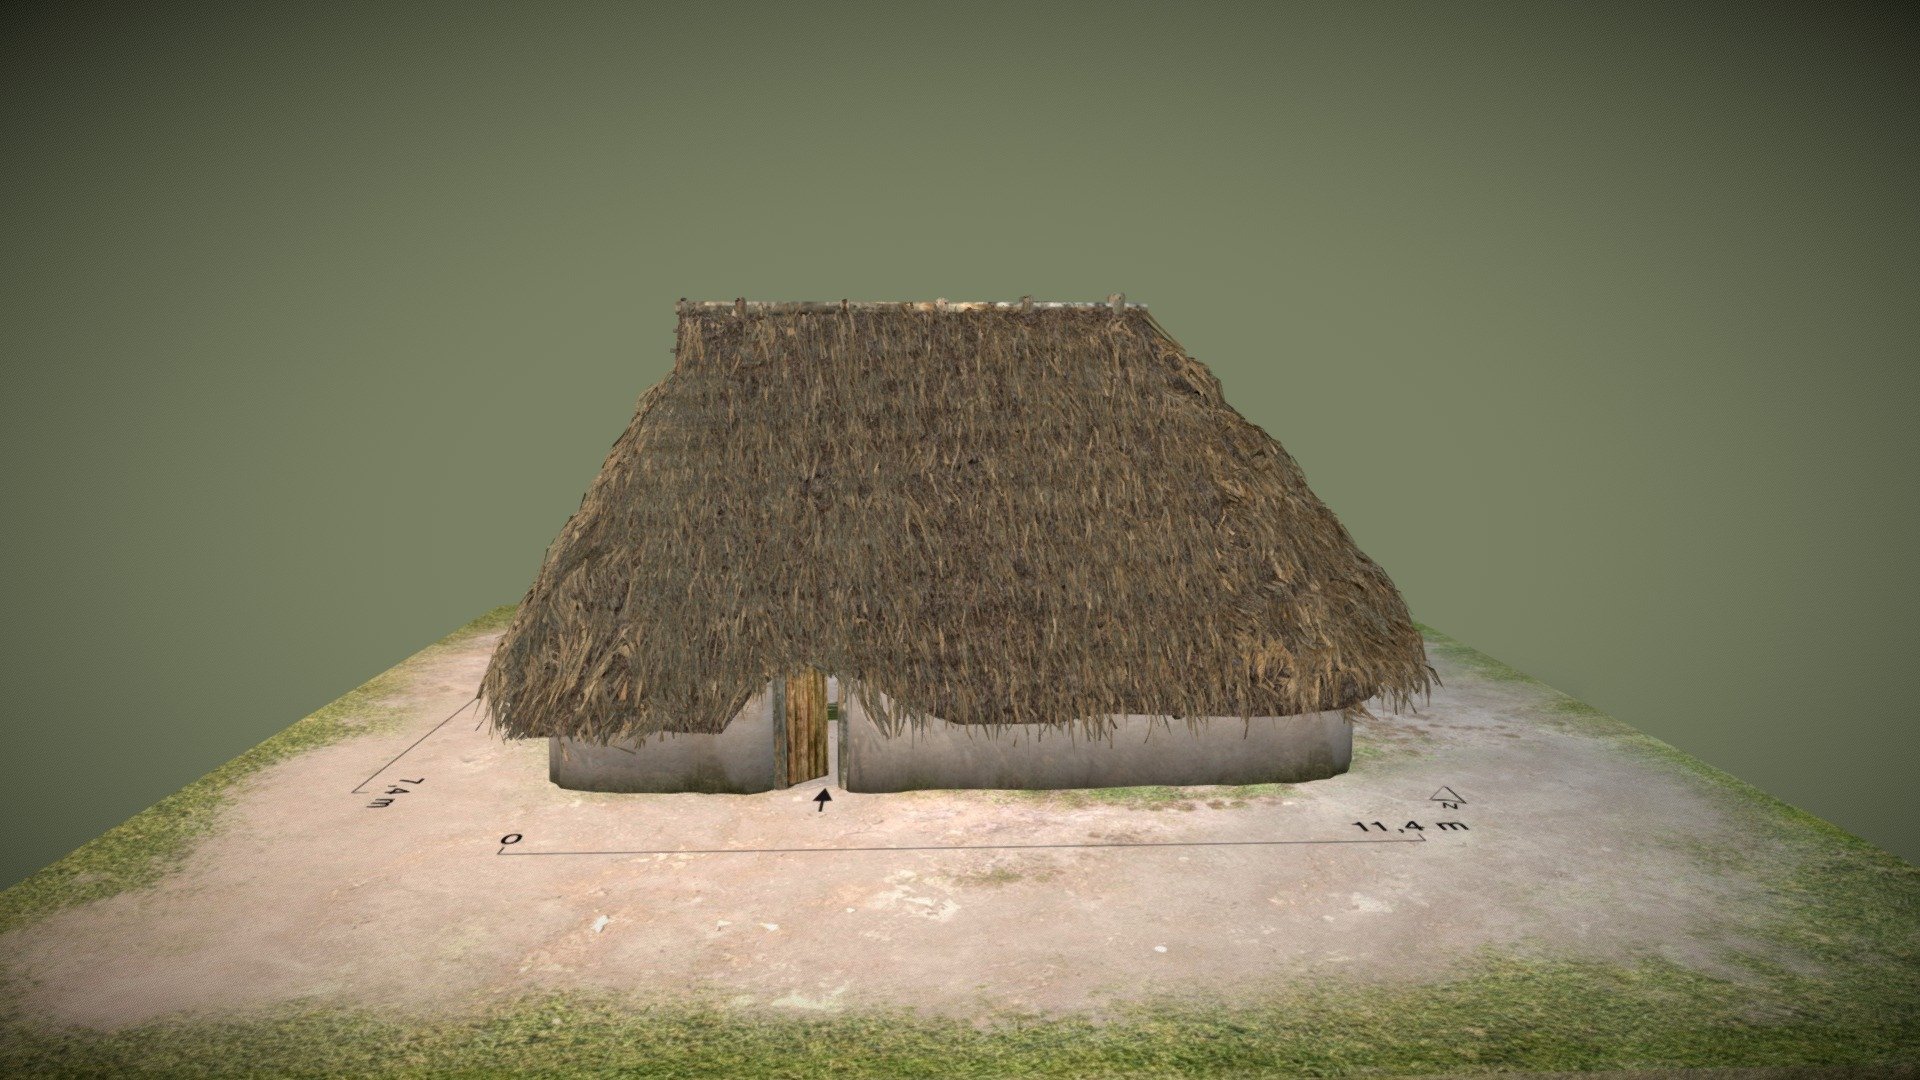 Based on archaeological findings on the banks of the river Rotte in Rotterdam, the Netherlands, this is a reconstruction of a farmhouse dated around 1000 AD.
For more information see the archaeological report (Dutch):
https://archisarchief.cultureelerfgoed.nl/Archis2/Archeorapporten/32/AR30071/BOORrapporten%20469-1.pdf

or some links in English:
https://detijdtrap.nl/en/

https://www.youtube.com/watch?v=UtS8eu7yUcA

https://www.youtube.com/watch?v=8WXKb5raj1U - Medieval farmhouse reconstruction - 3D model by Carolien Bijvoet (@carolien) 3d model